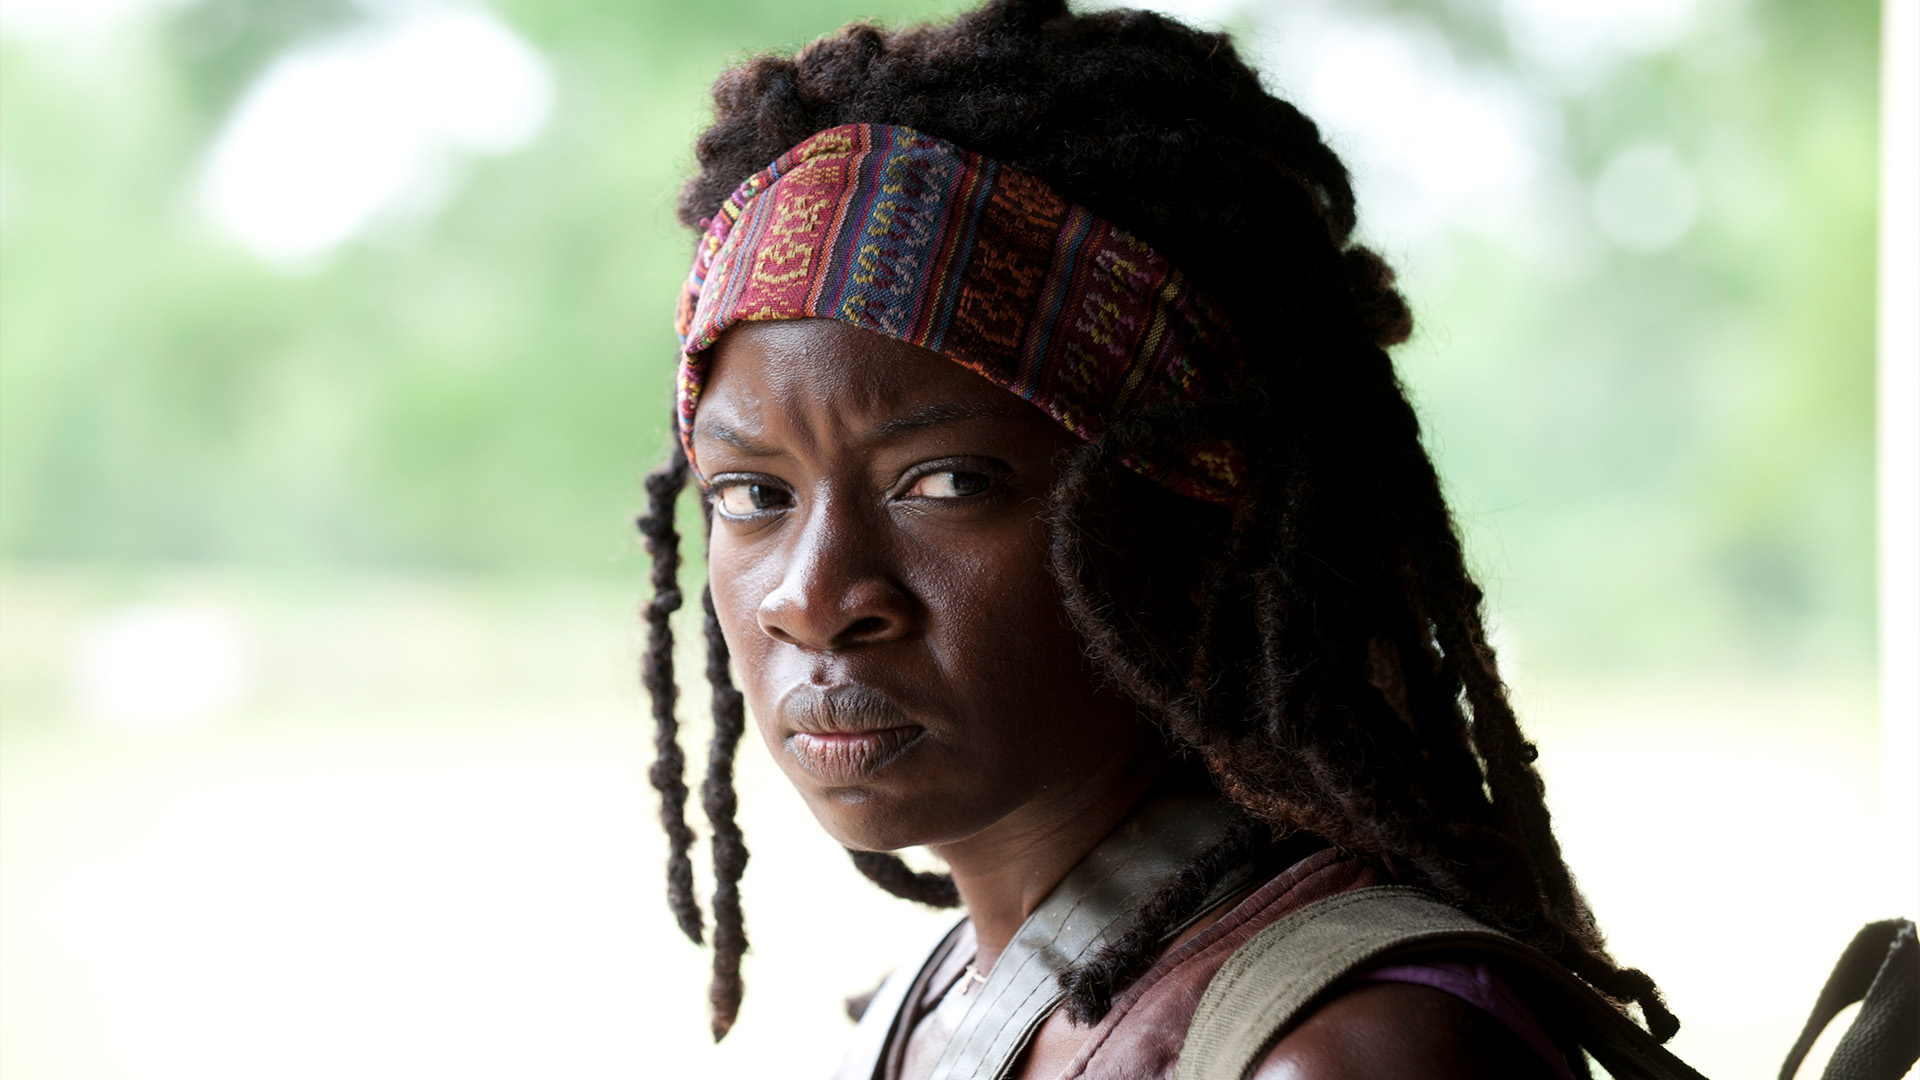 Seed: Best of Michonne Edition, Relive Michonne's best moments in this iconic episode from Season 3., Season 1066703, Episode 1